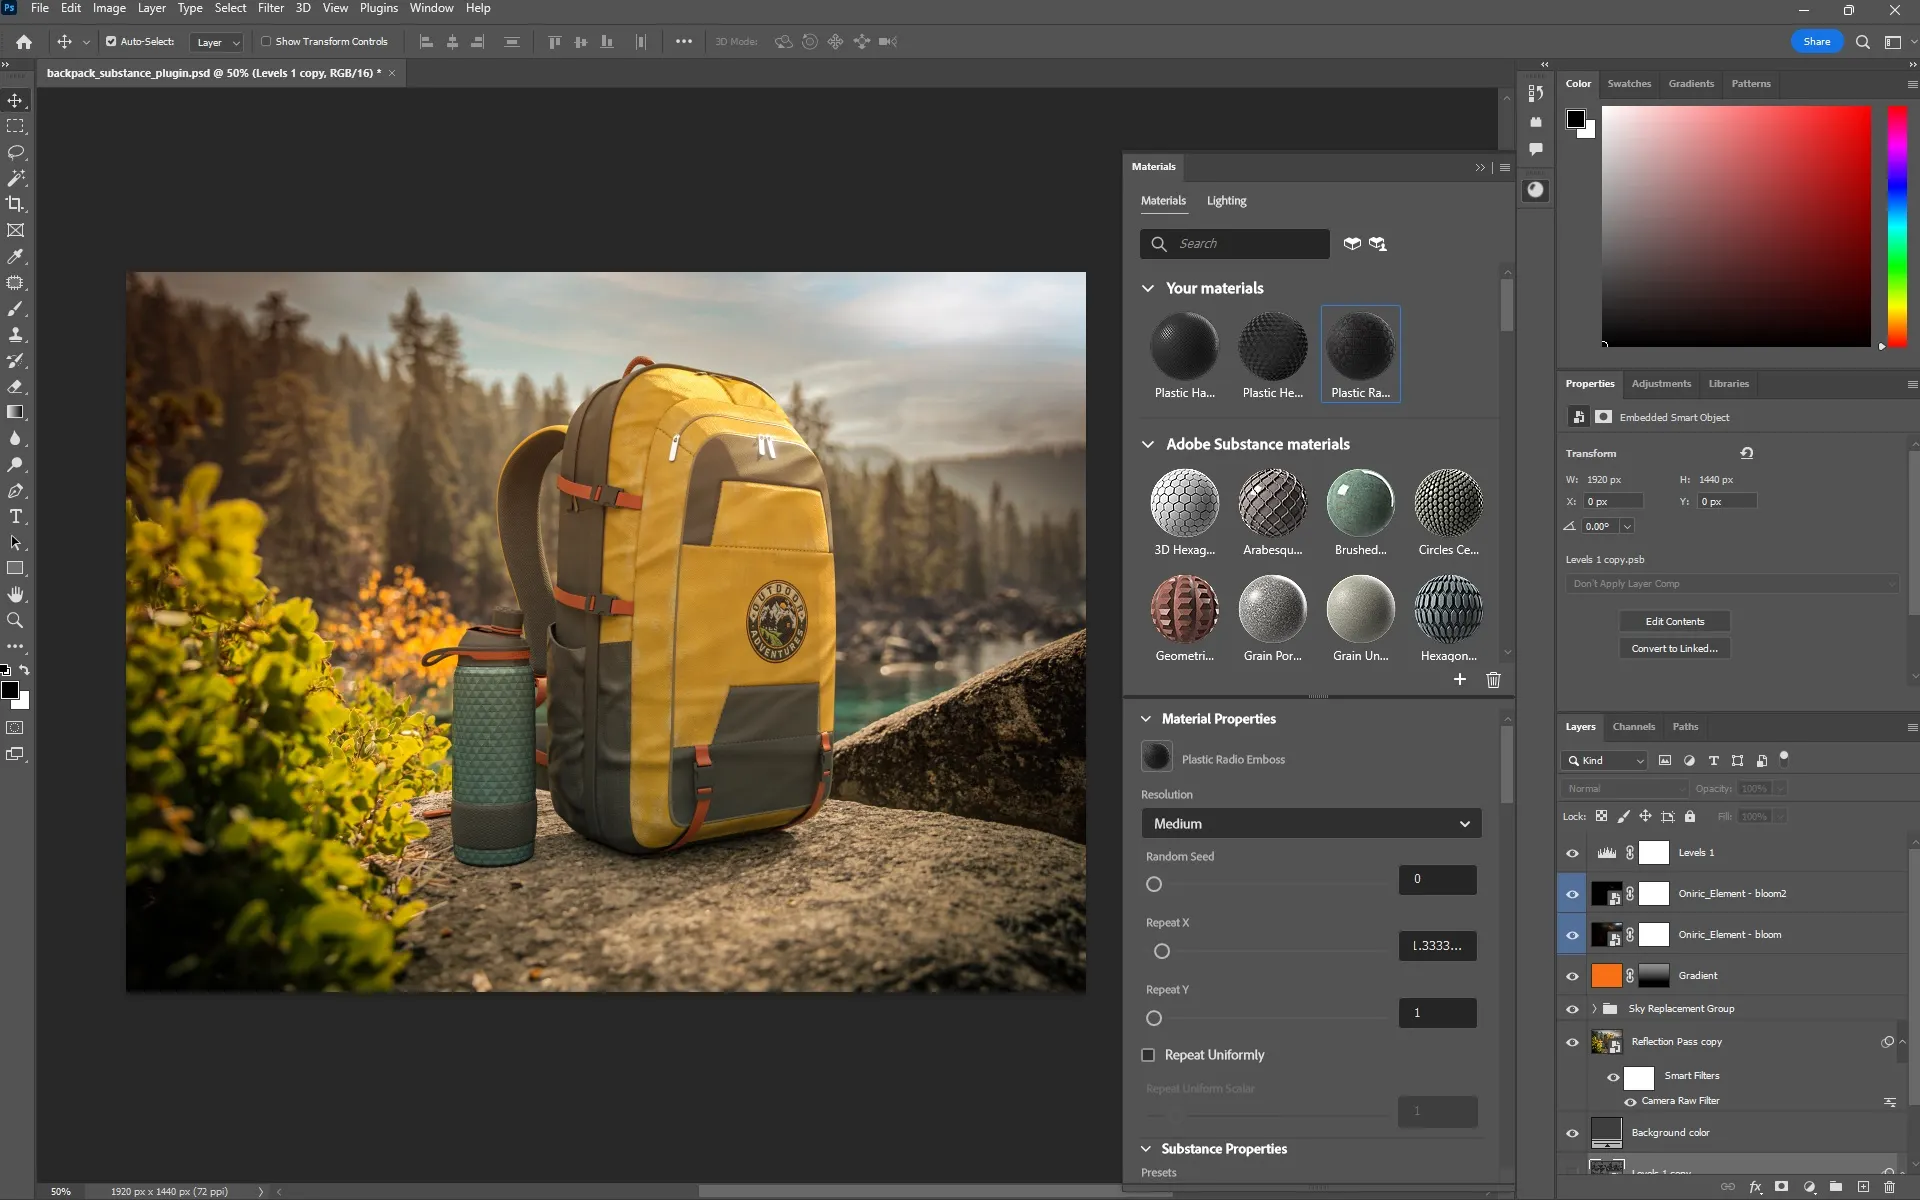 Screenshot showing a yellow backpack using Substance materials for Photoshop.